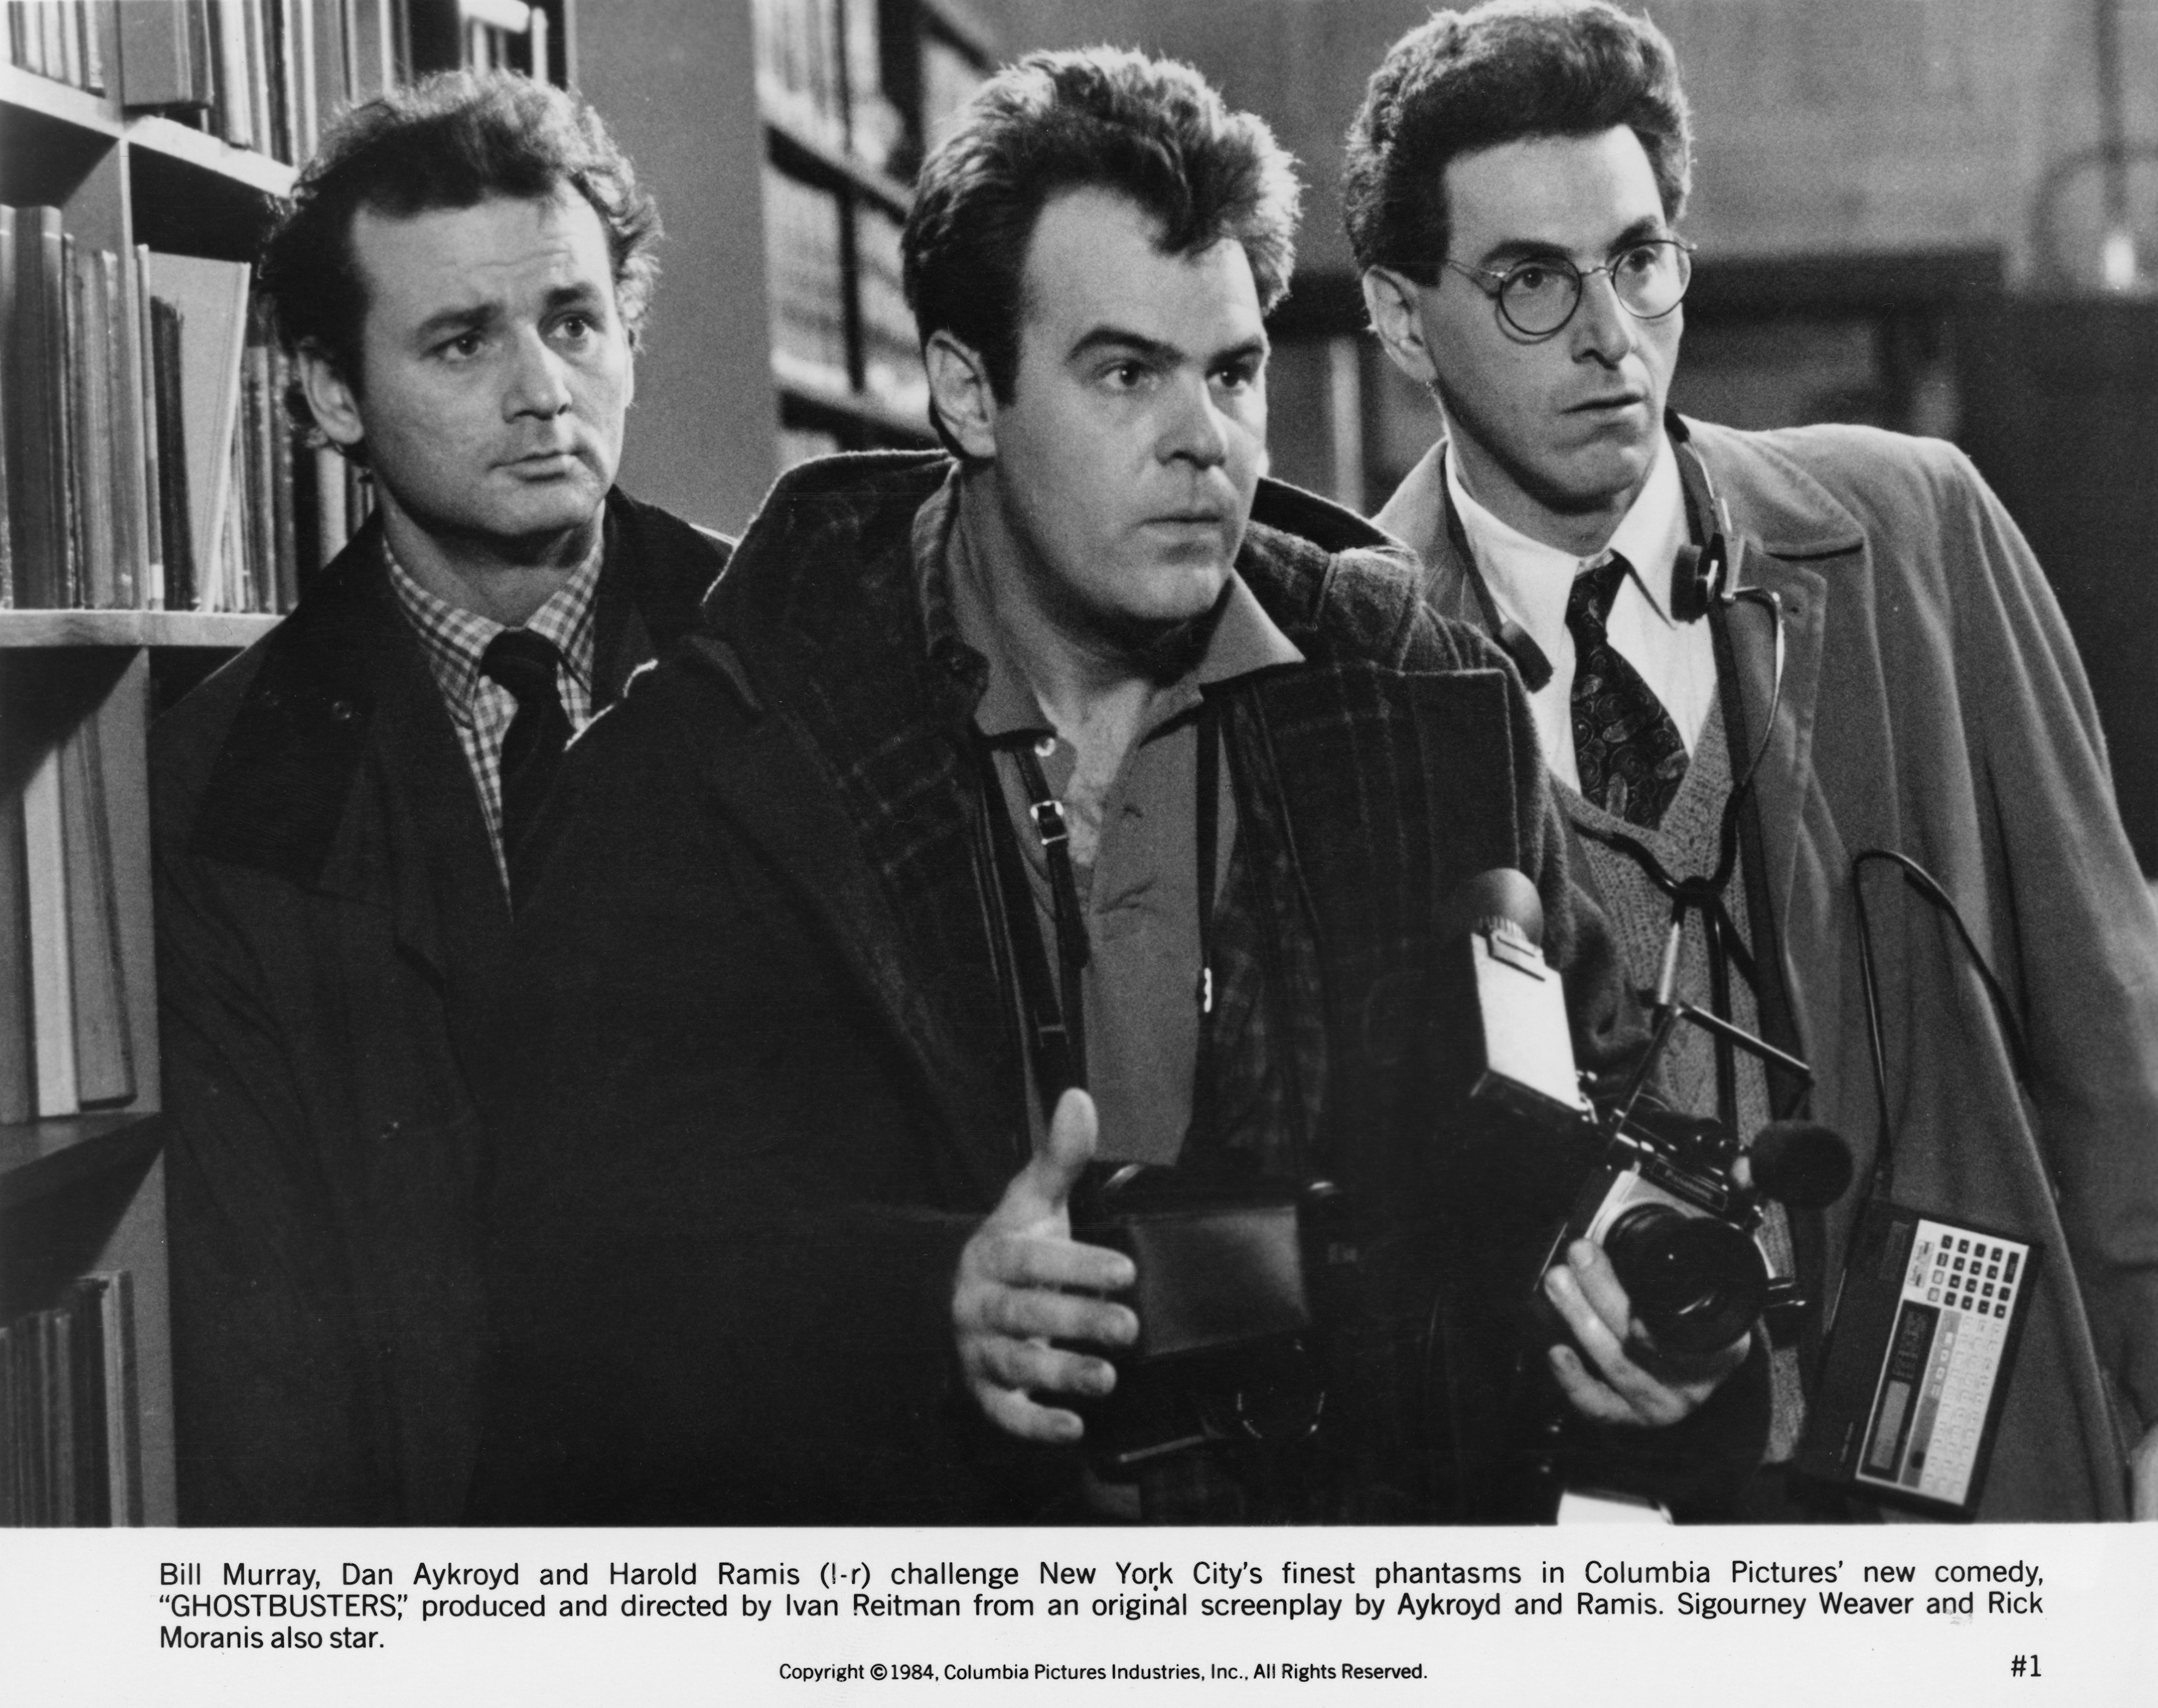 Black and white photo of Bill Murray, Dan Aykroyd, and Harold Ramis in a scene from the 1984 film 'Ghostbusters.'